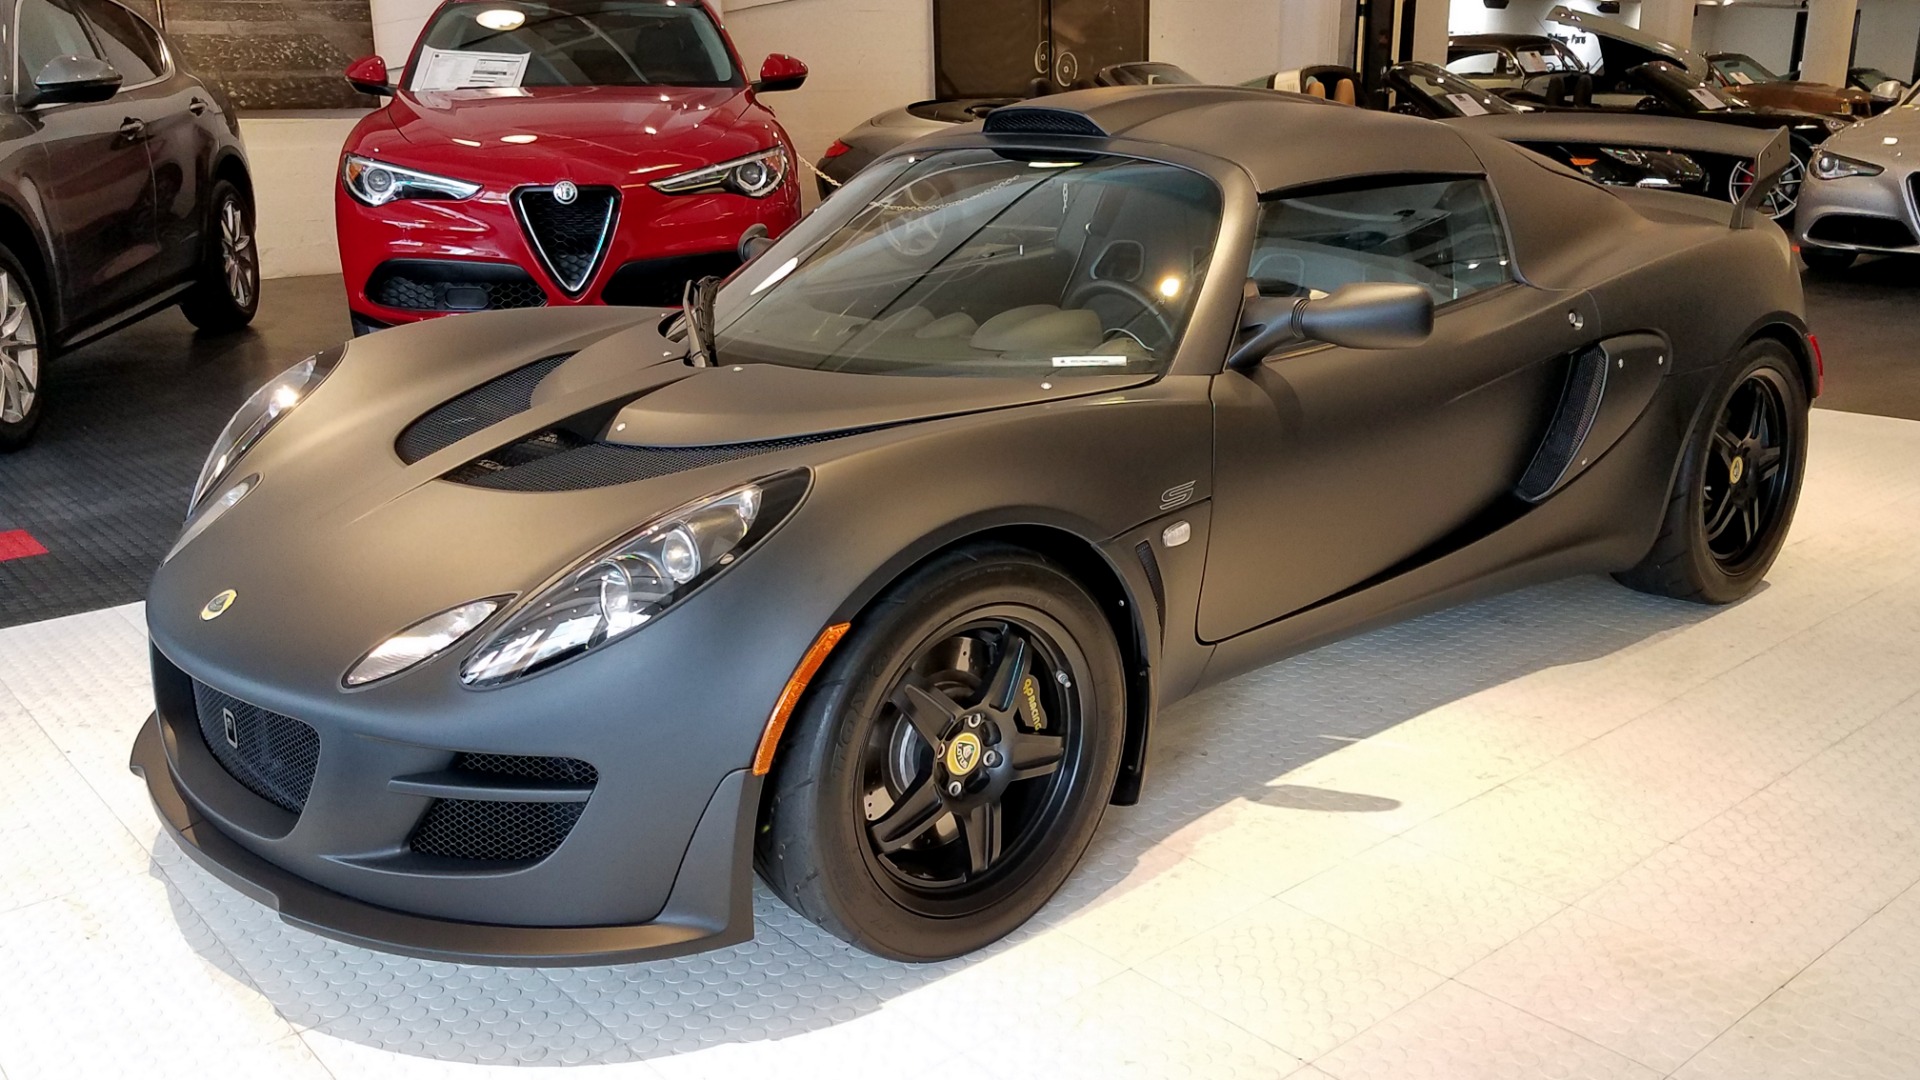 Used 2011 Lotus Exige S 260 Final Edition For Sale ($79,900) | Cars  Dawydiak Stock #170804C